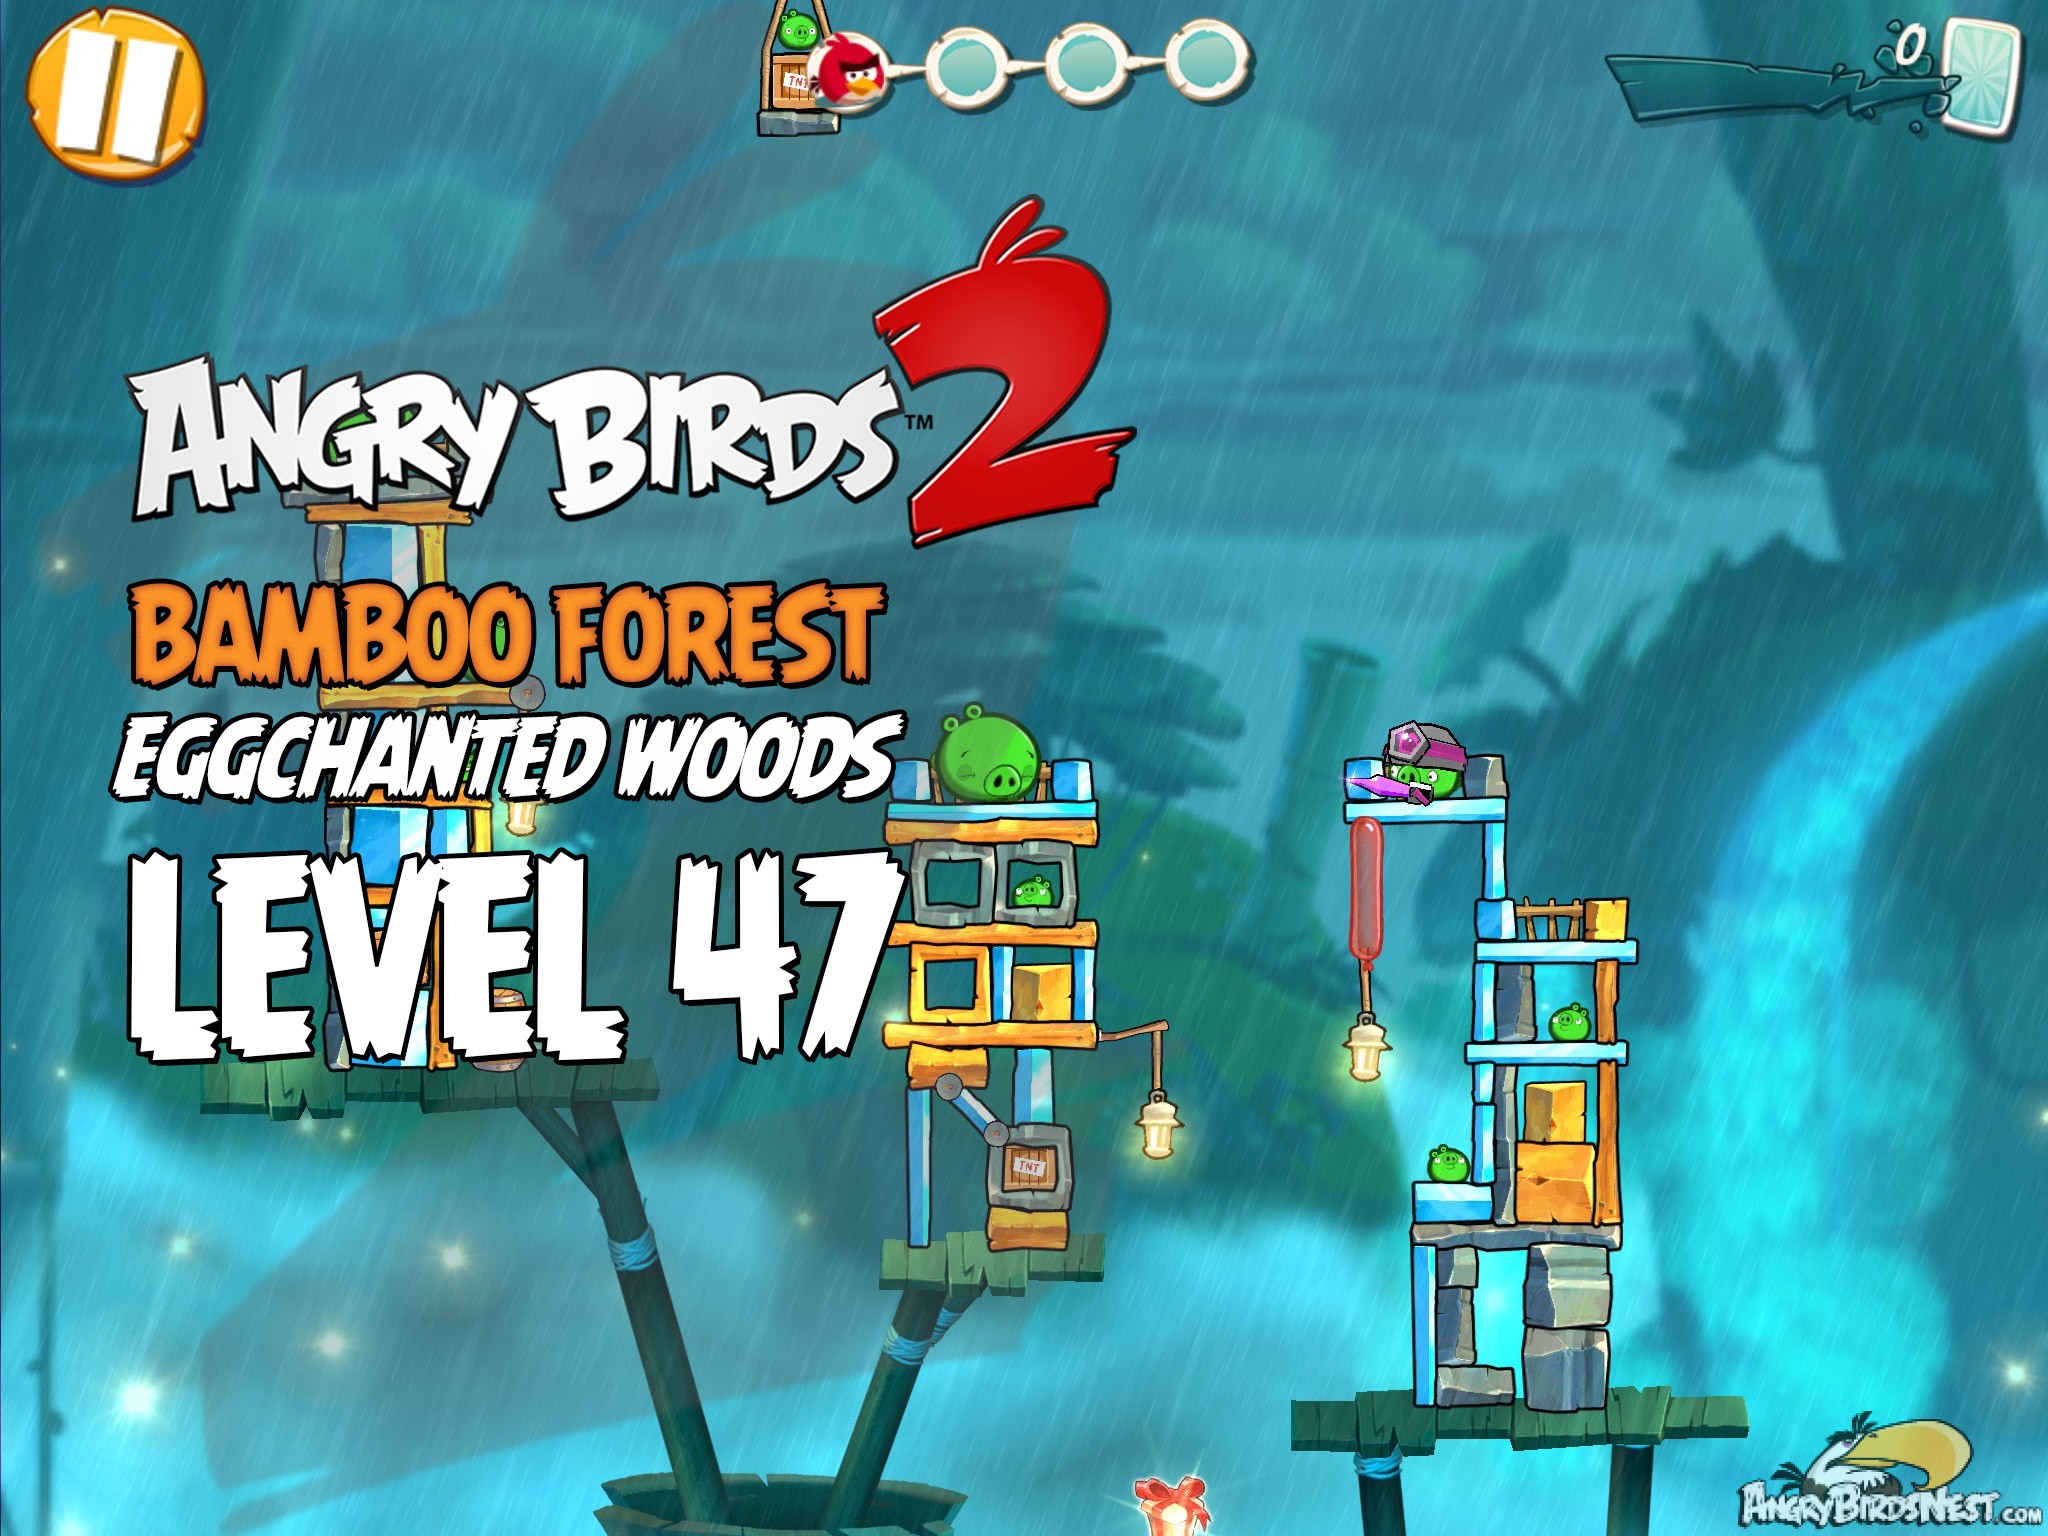 Angry Birds 2 Bamboo Forest Eggchanted Woods Level 47